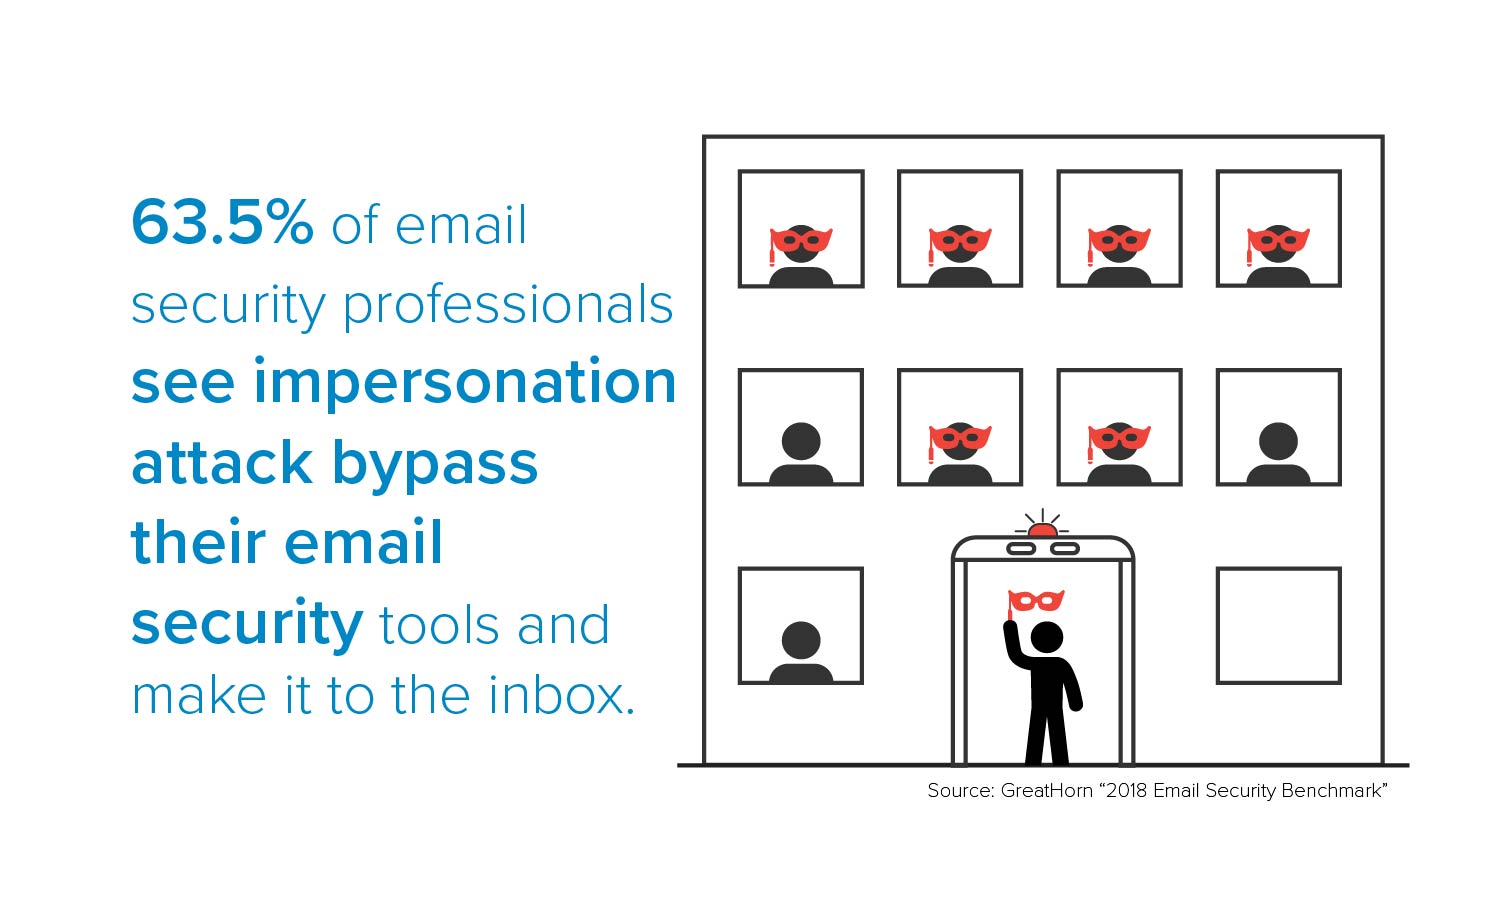 65% of email security professionals see impersonation attacks